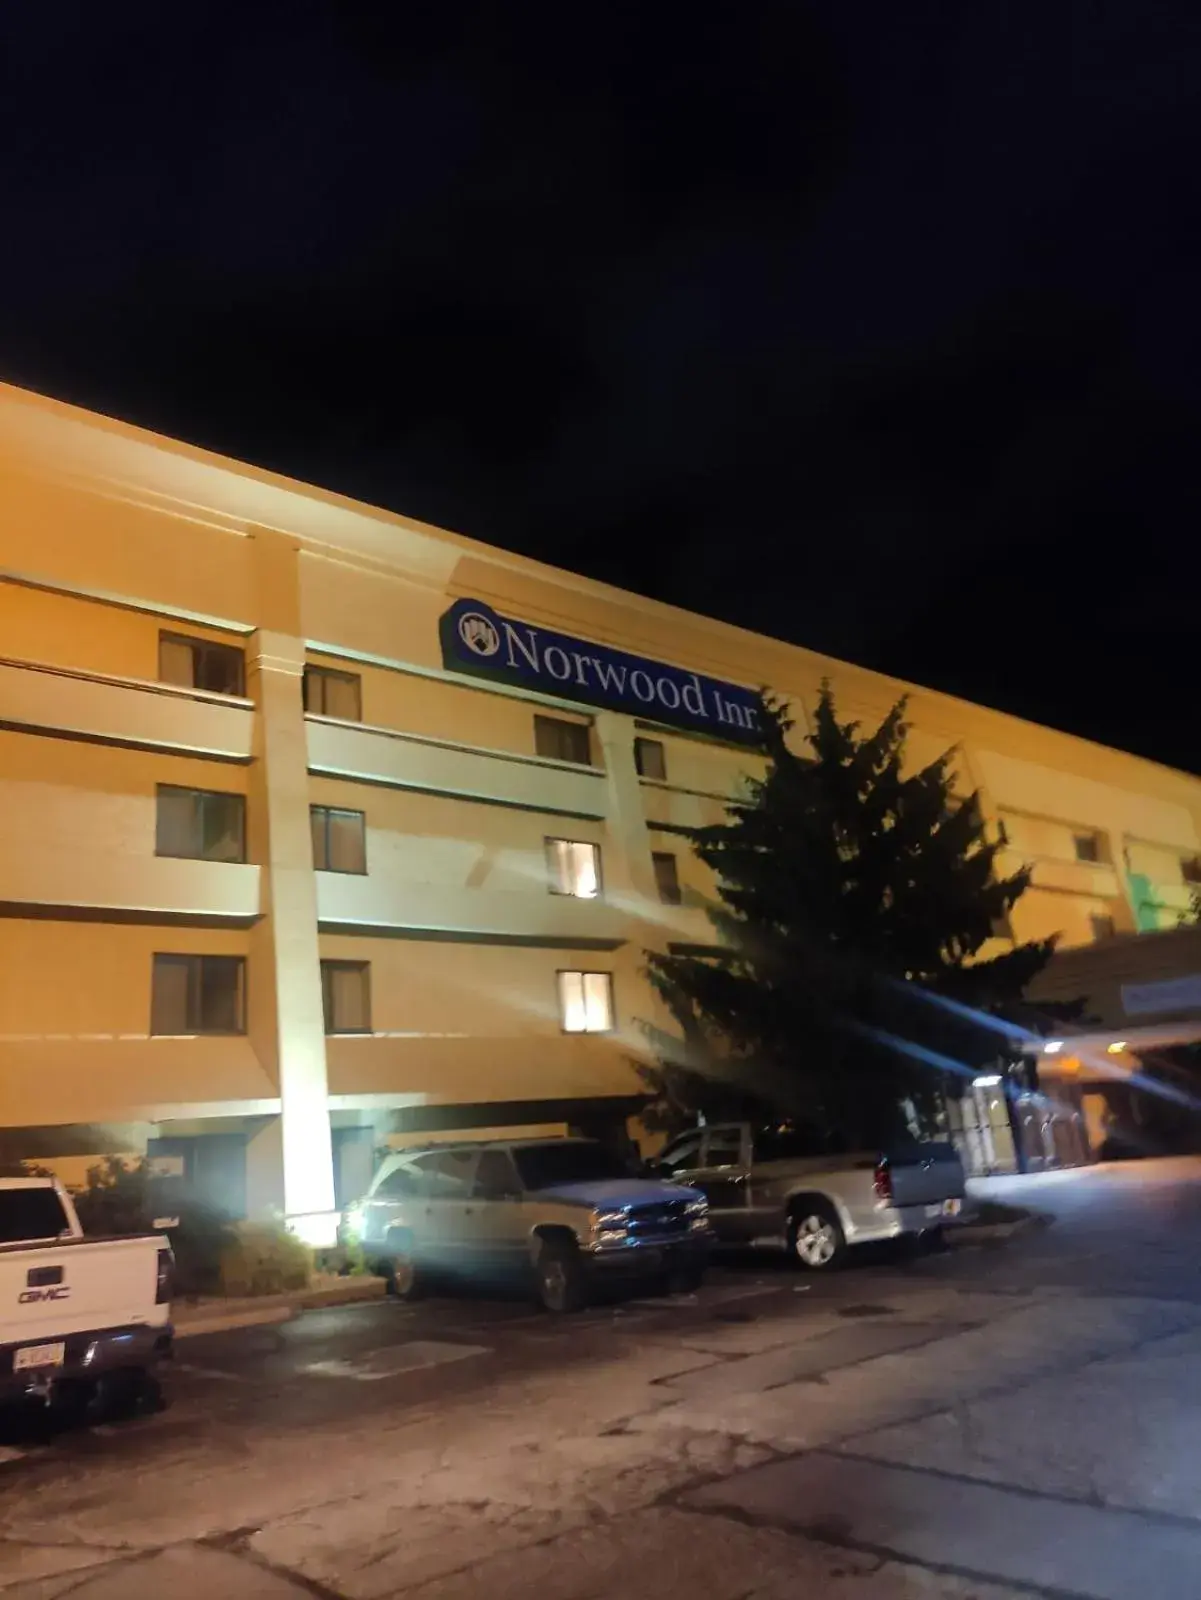 Property Building in Norwood Inn & Suites Indianapolis East Post Drive